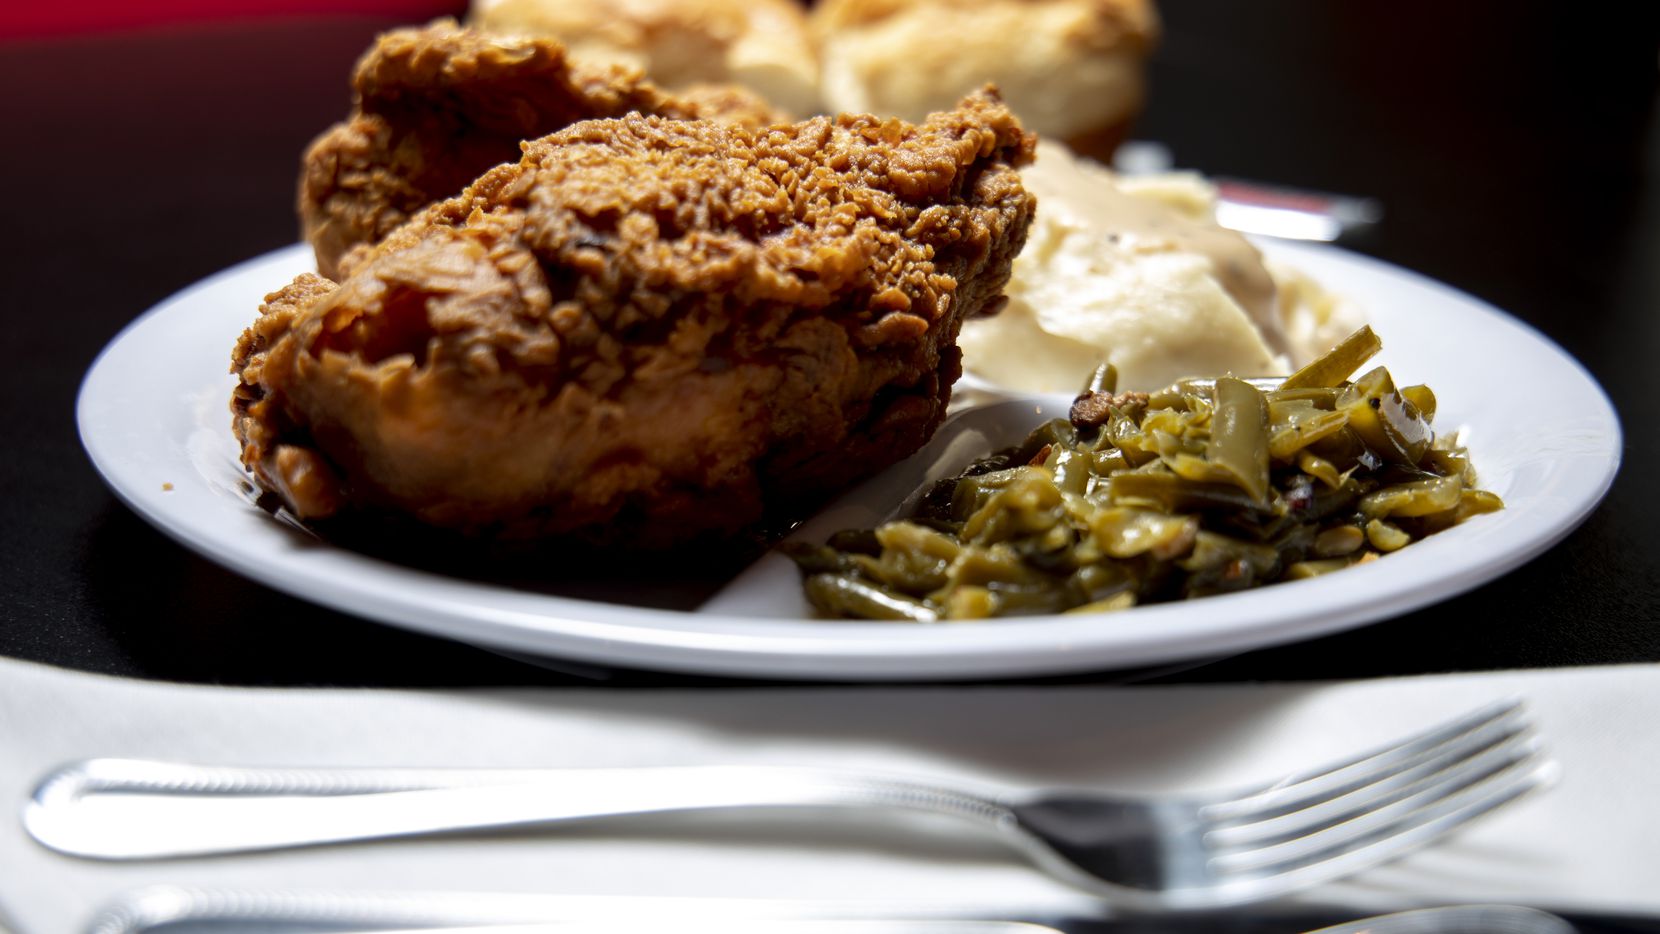 Here's the way to do it at Bubba's: Get the three-piece fried chicken with yeast rolls,...